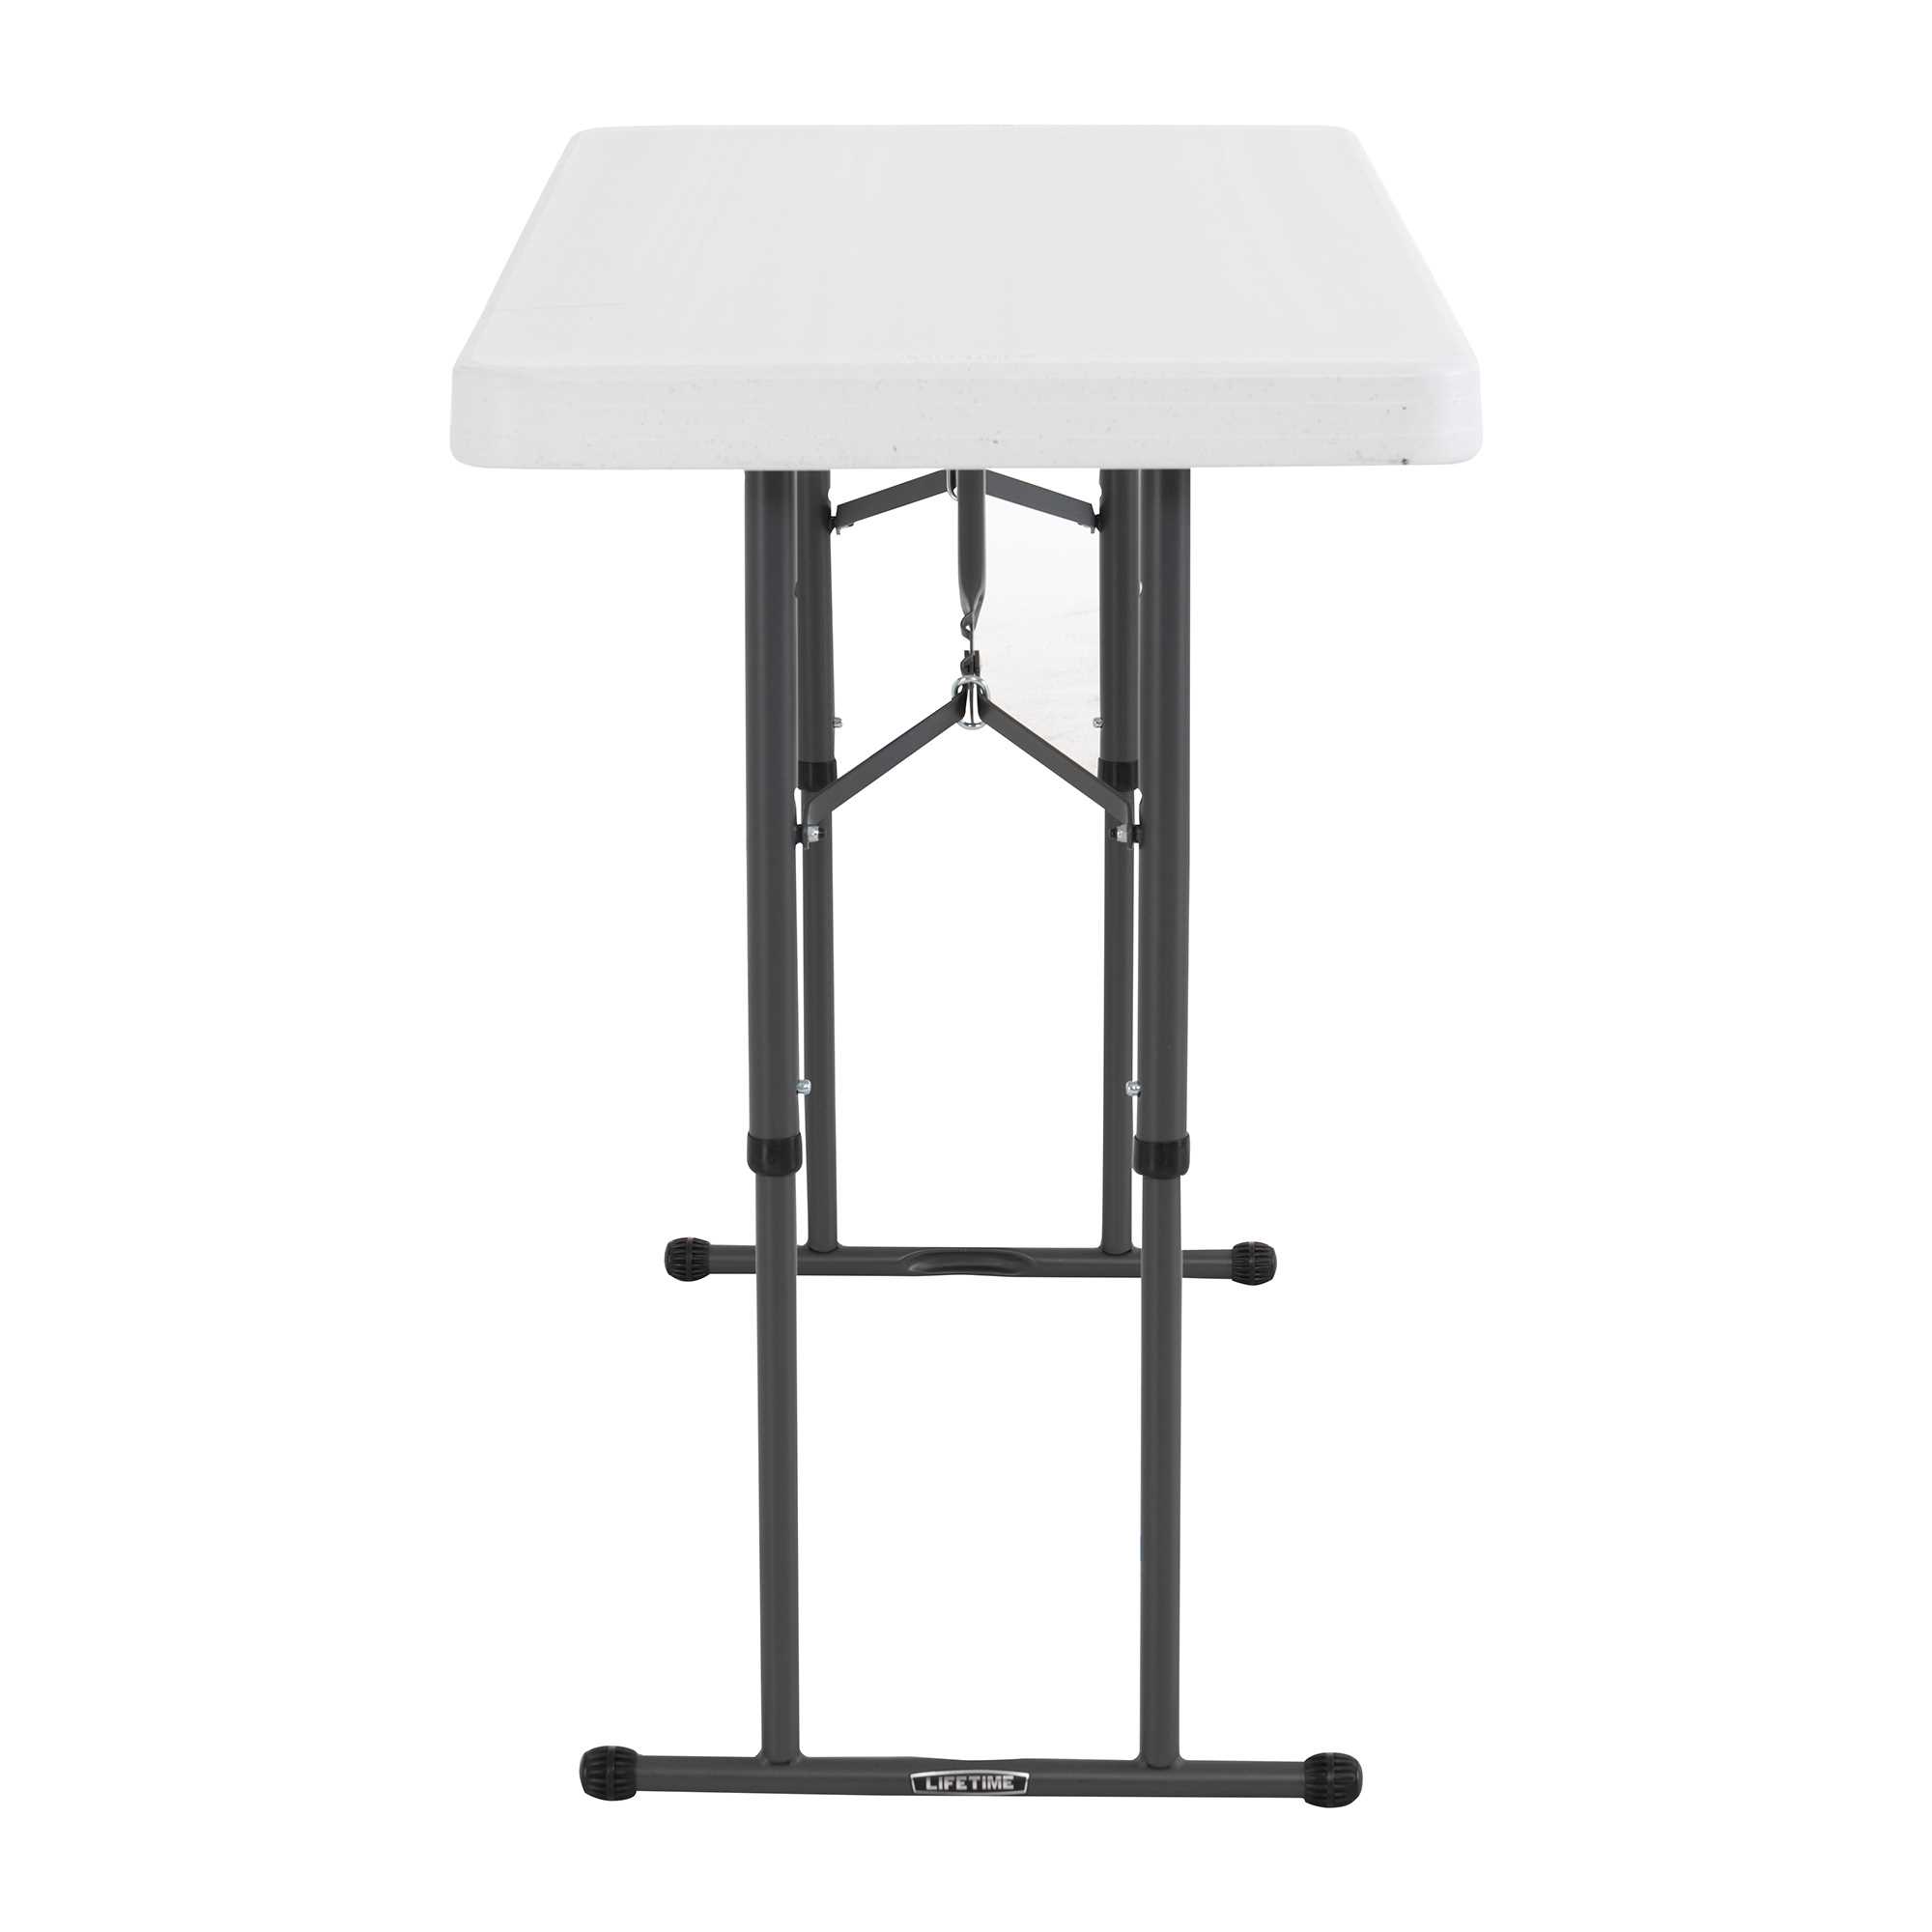 Lifetime 4 Foot Adjustable Rectangle Folding Table, Indoor/Outdoor Commercial Grade, White Granite (80160) - image 5 of 16